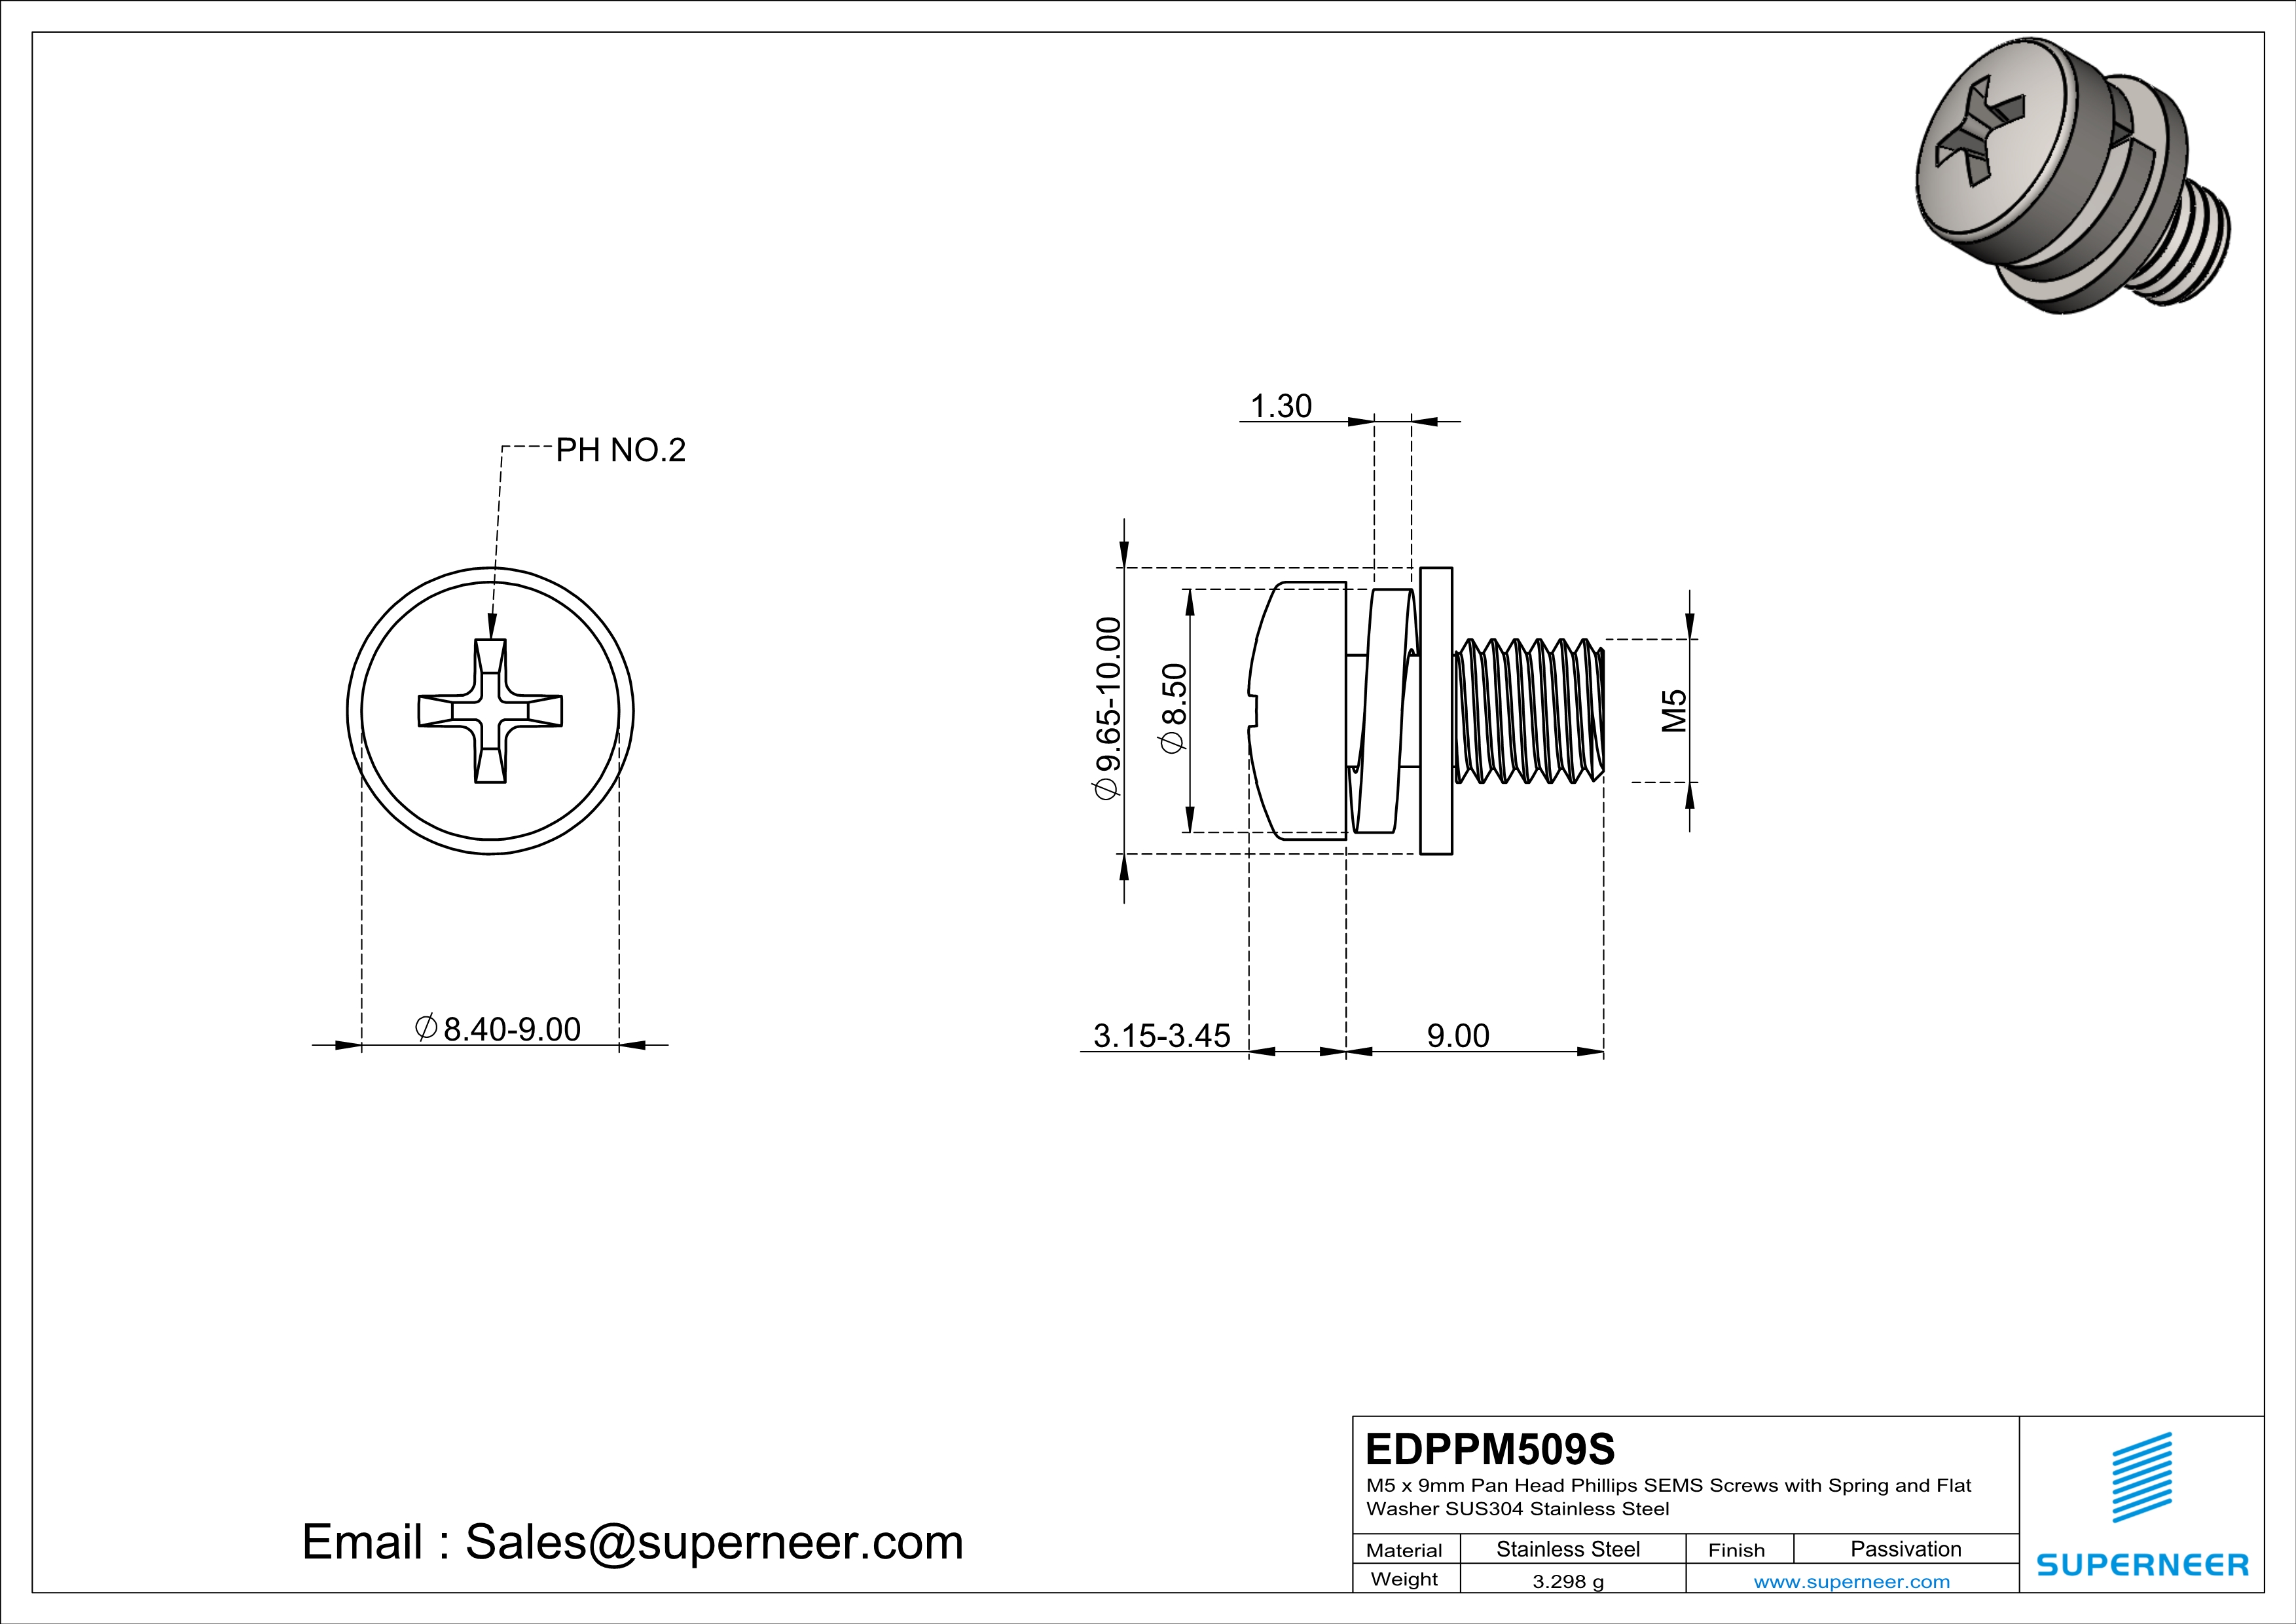 M5 x 9mm Pan Head Phillips SEMS Screws with Spring and Flat Washer SUS304 Stainless Steel Inox